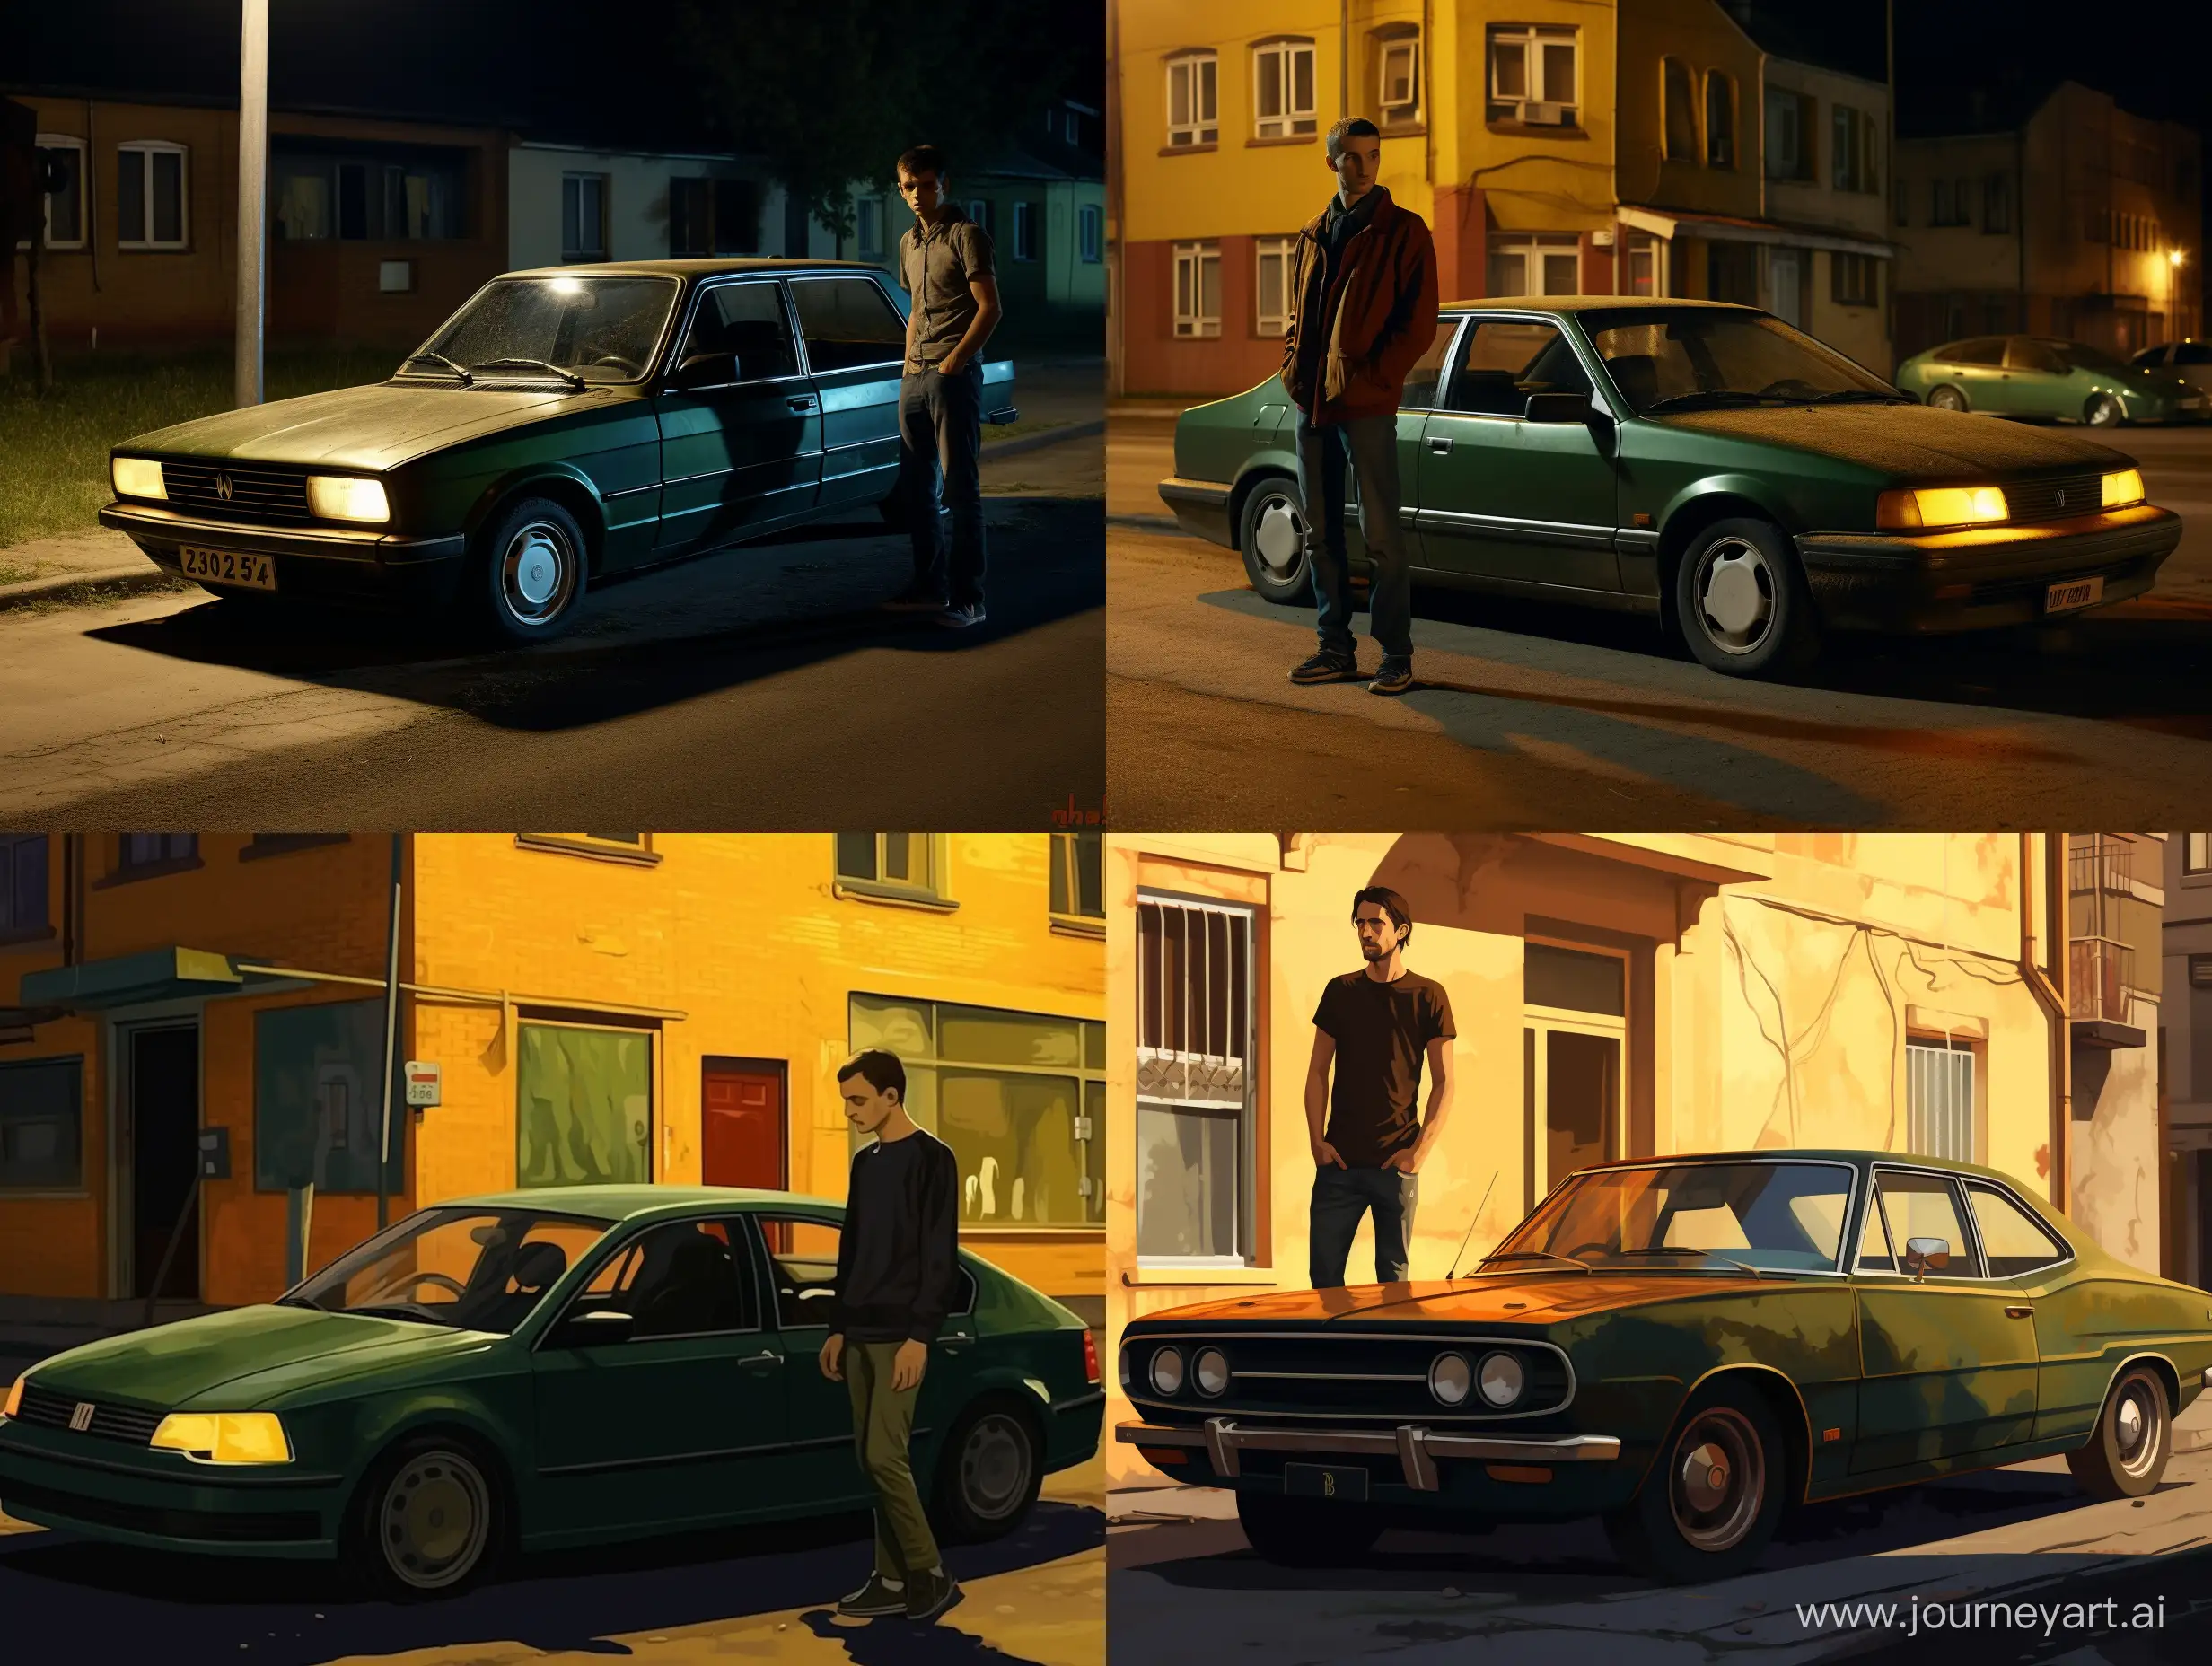 A young guy is standing next to an old model of a dark green European compact sedan. The sedan has a vinyl decal - two gold stripes on the hood. The yellow halogen headlights of this car shine brightly. The action takes place on a dark street in a residential area of an Eastern European city